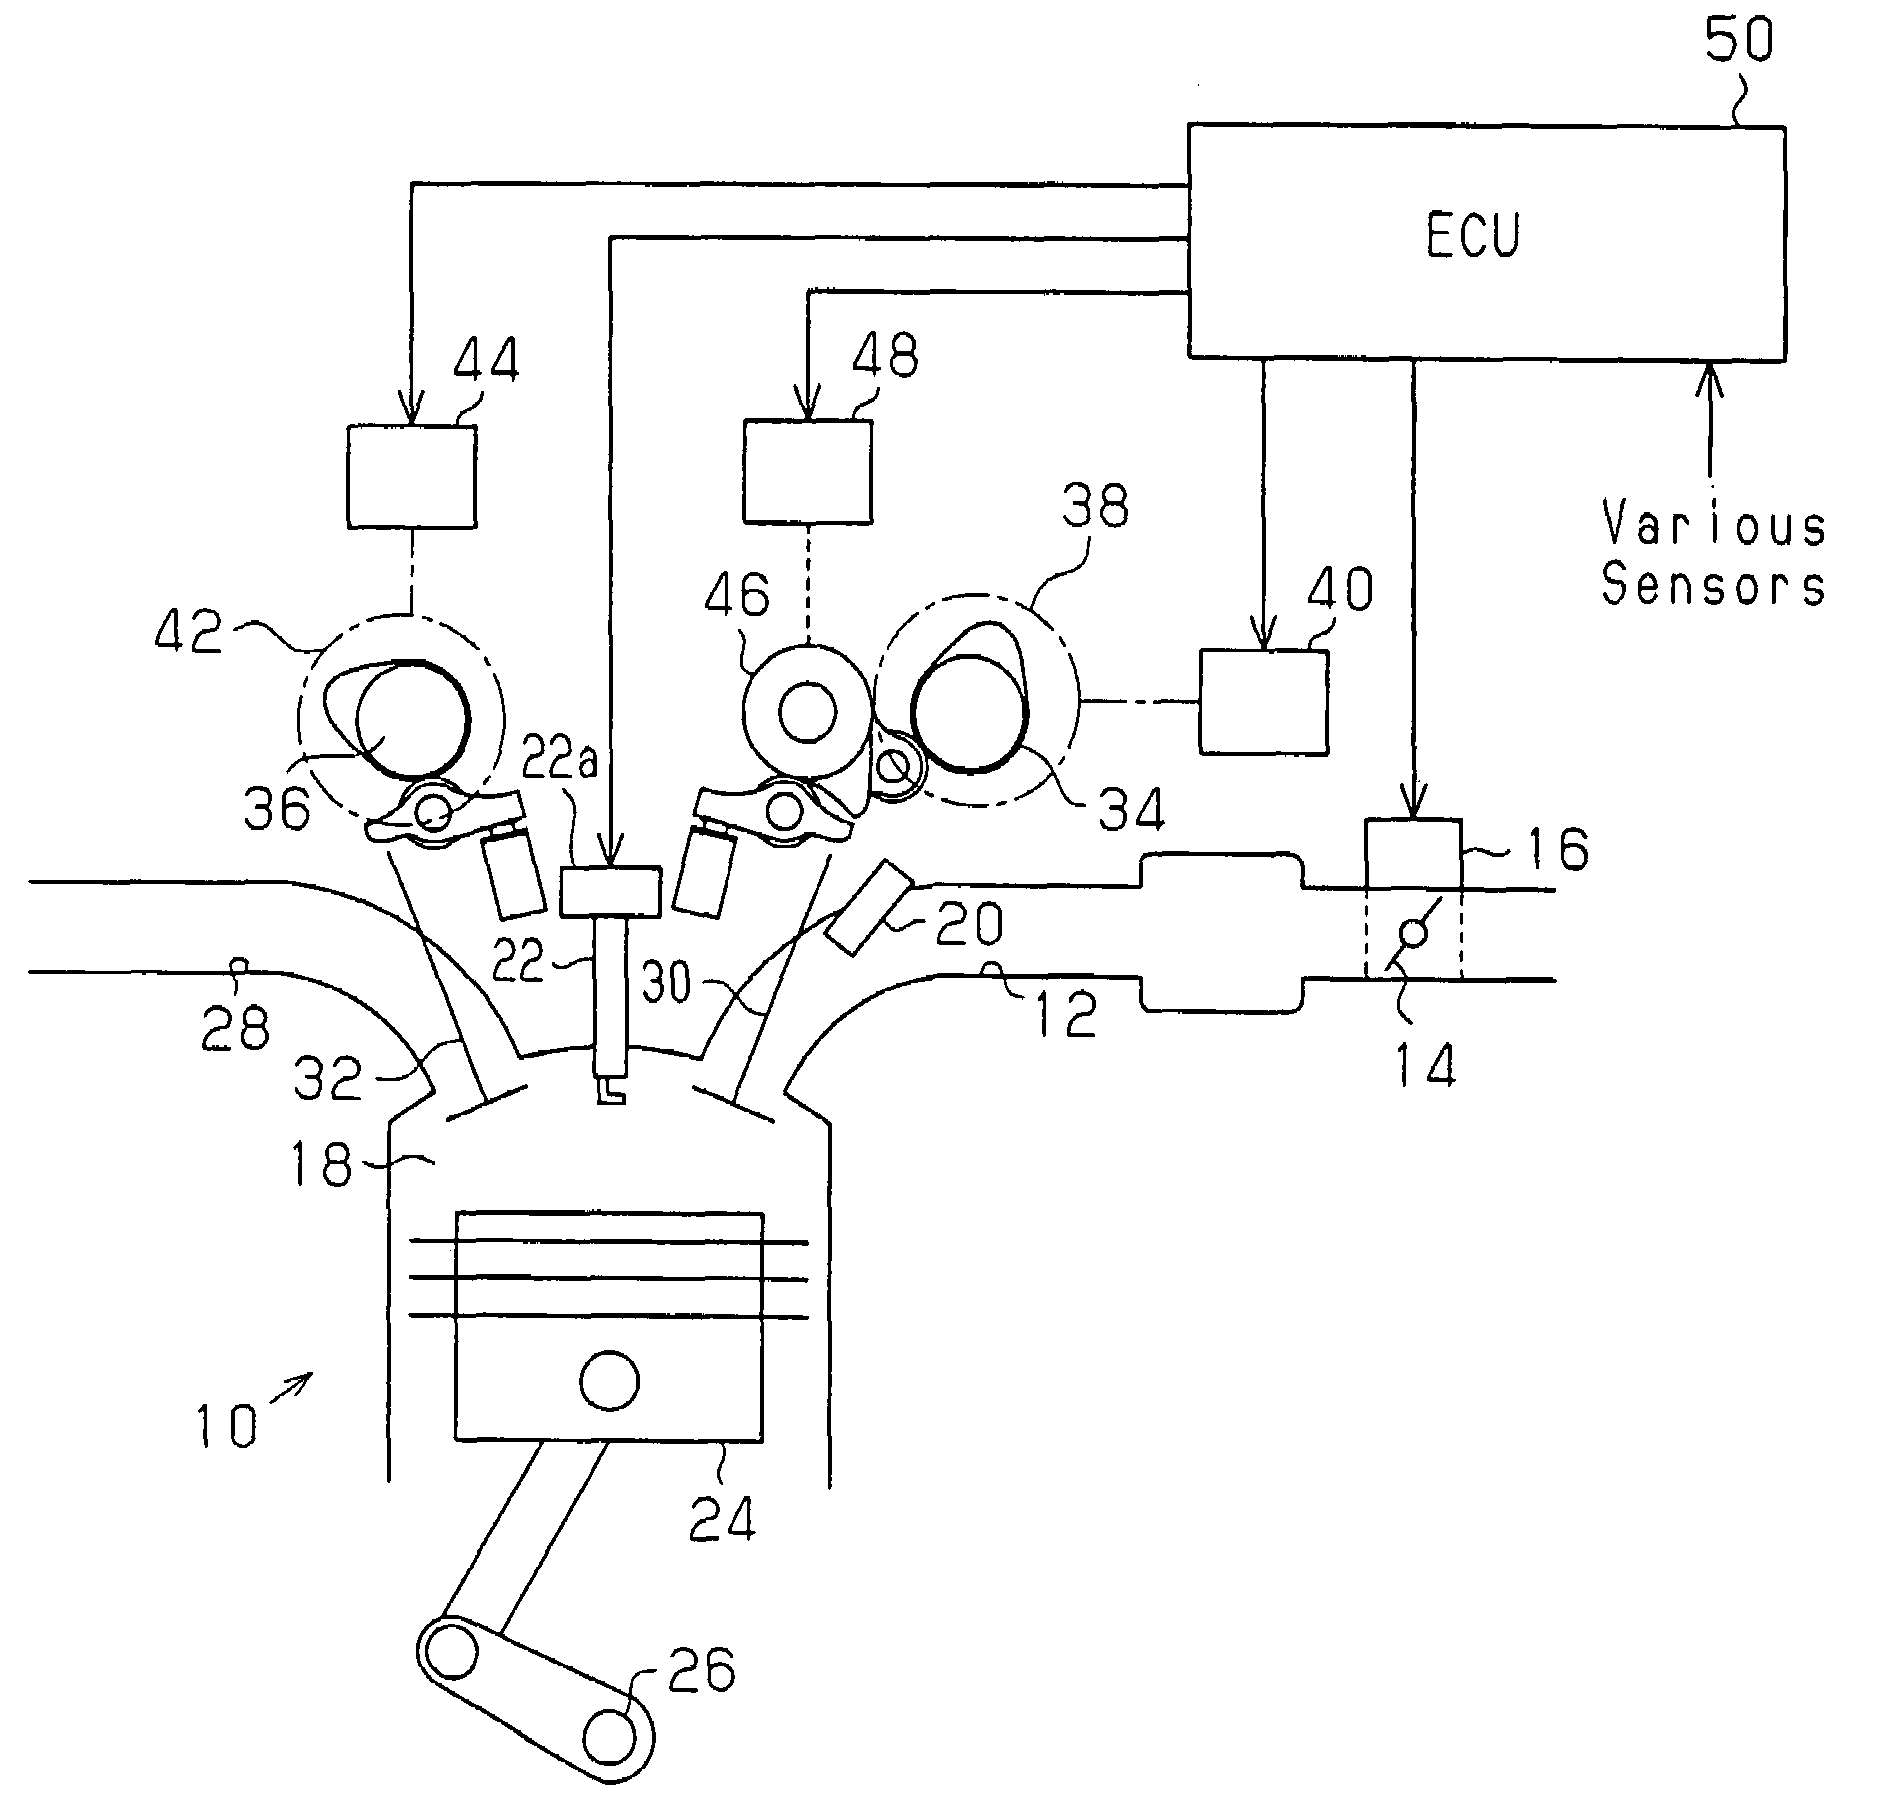 Idle speed controller for internal combustion engine